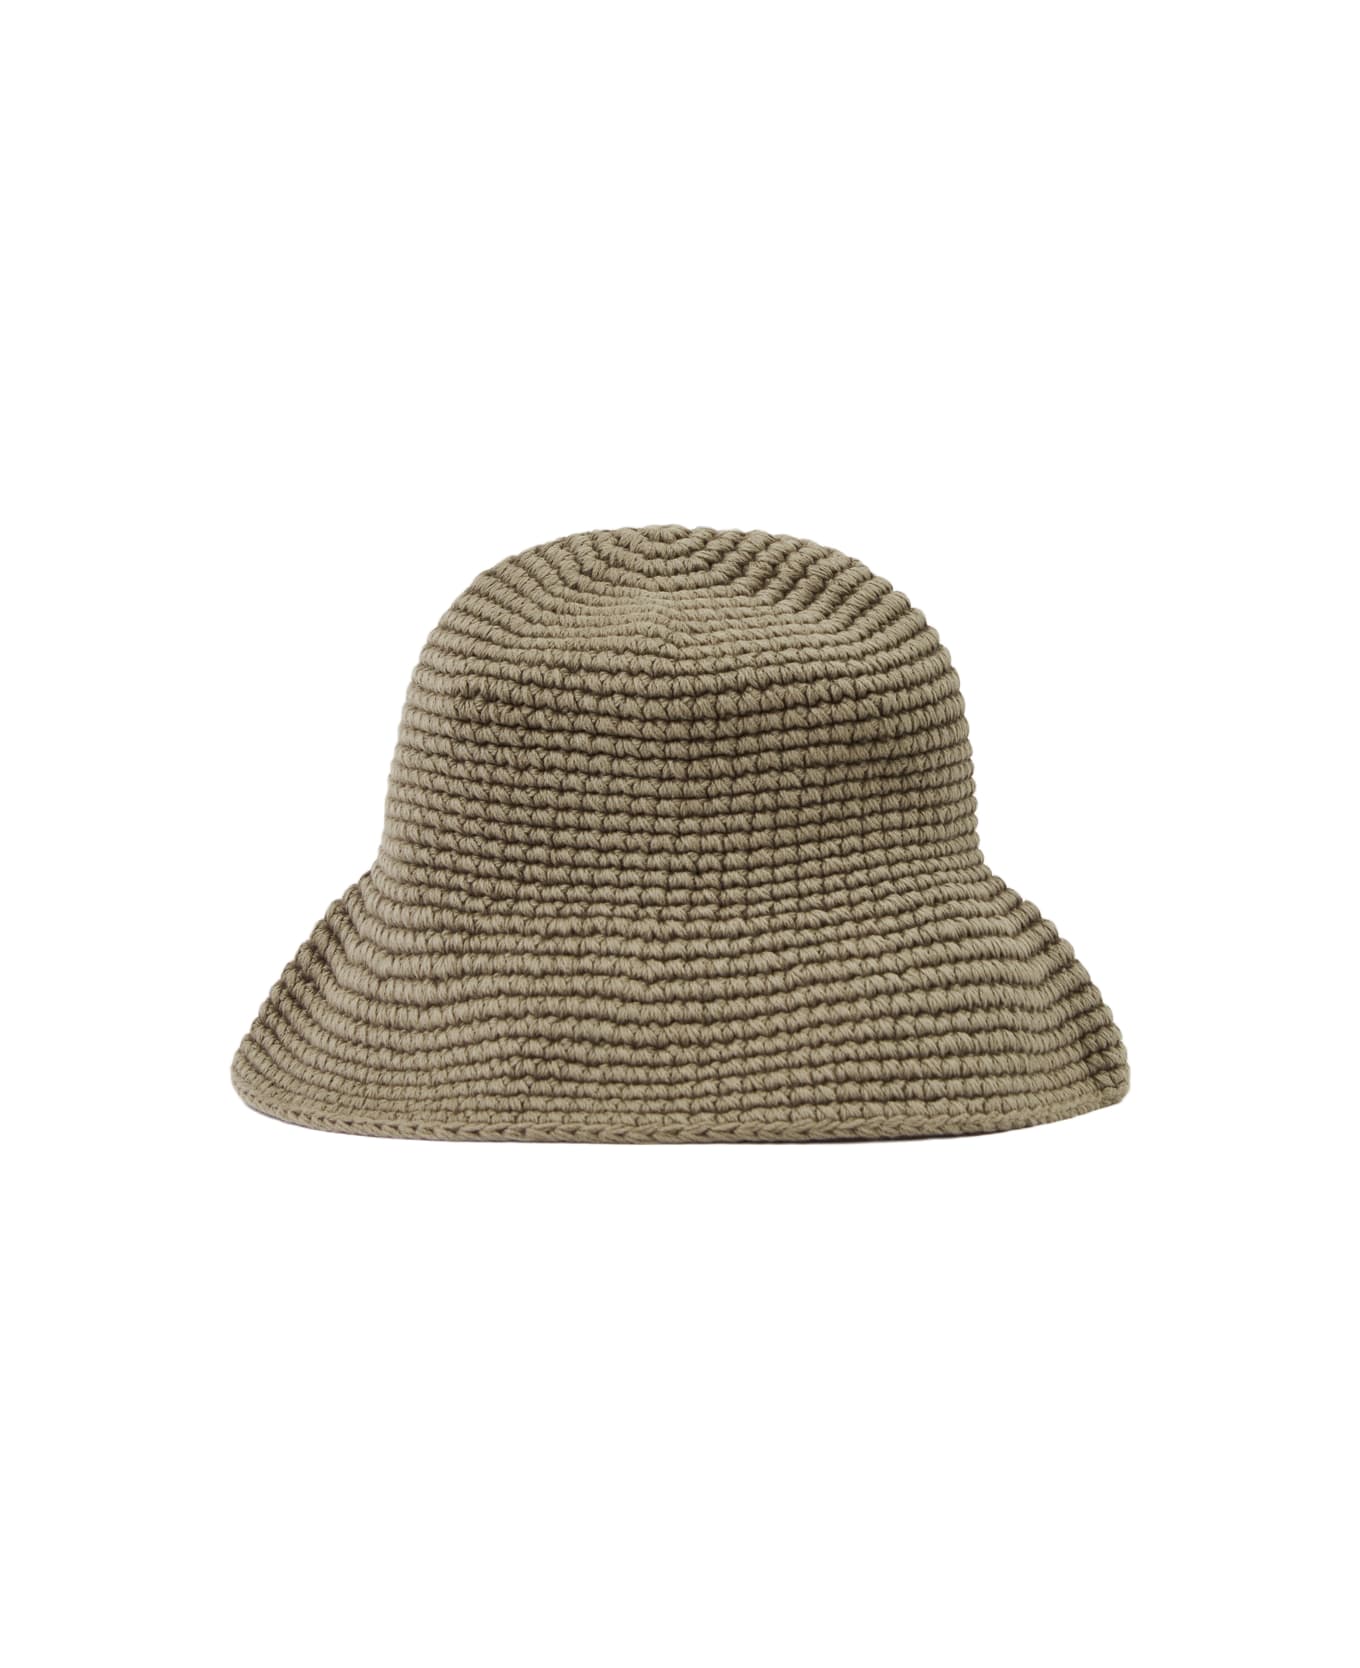 Our Legacy Tom Tom Hats - green